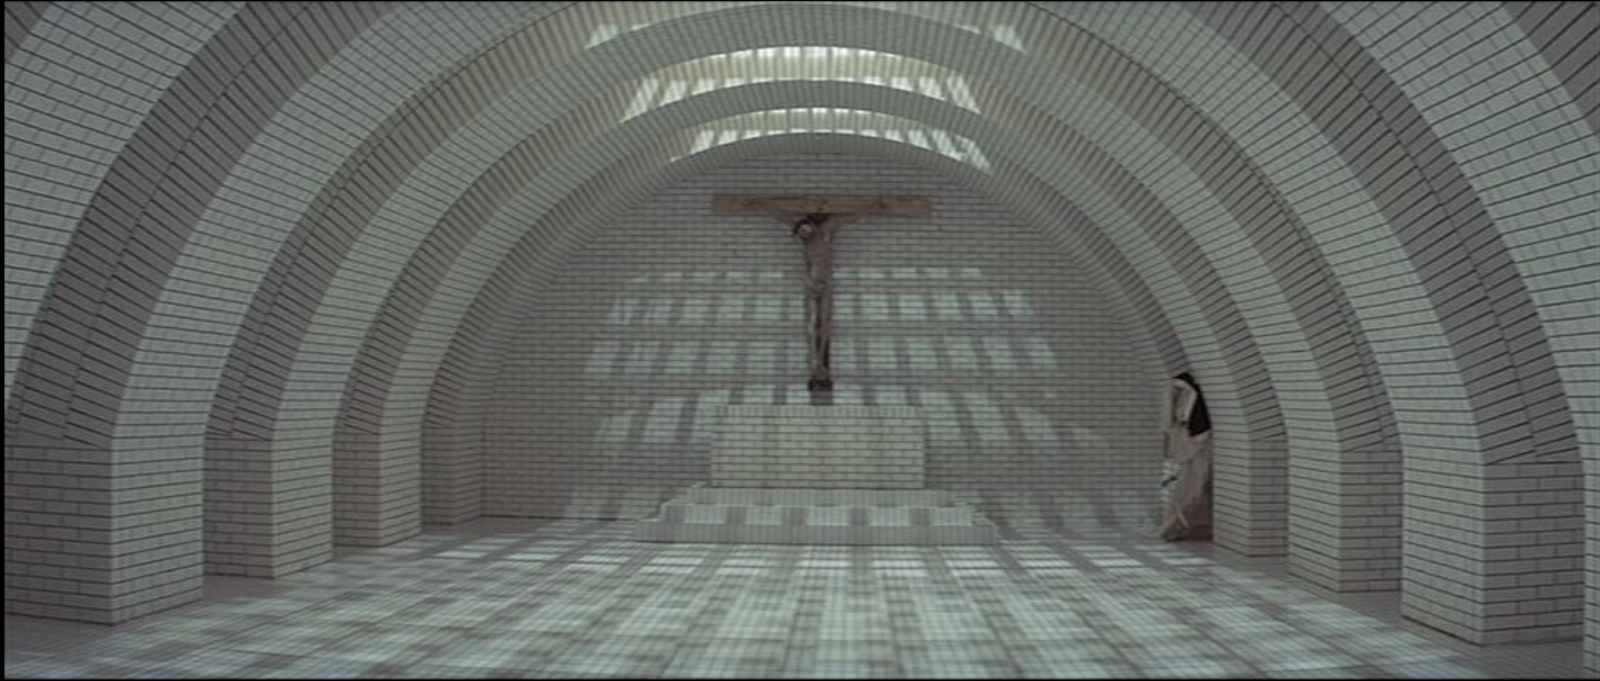 A room with a curved archway of white brick in an intricate pattern. A crucifix with a figure on it is visible from a distance, and a nun's habit is shown in the corner.